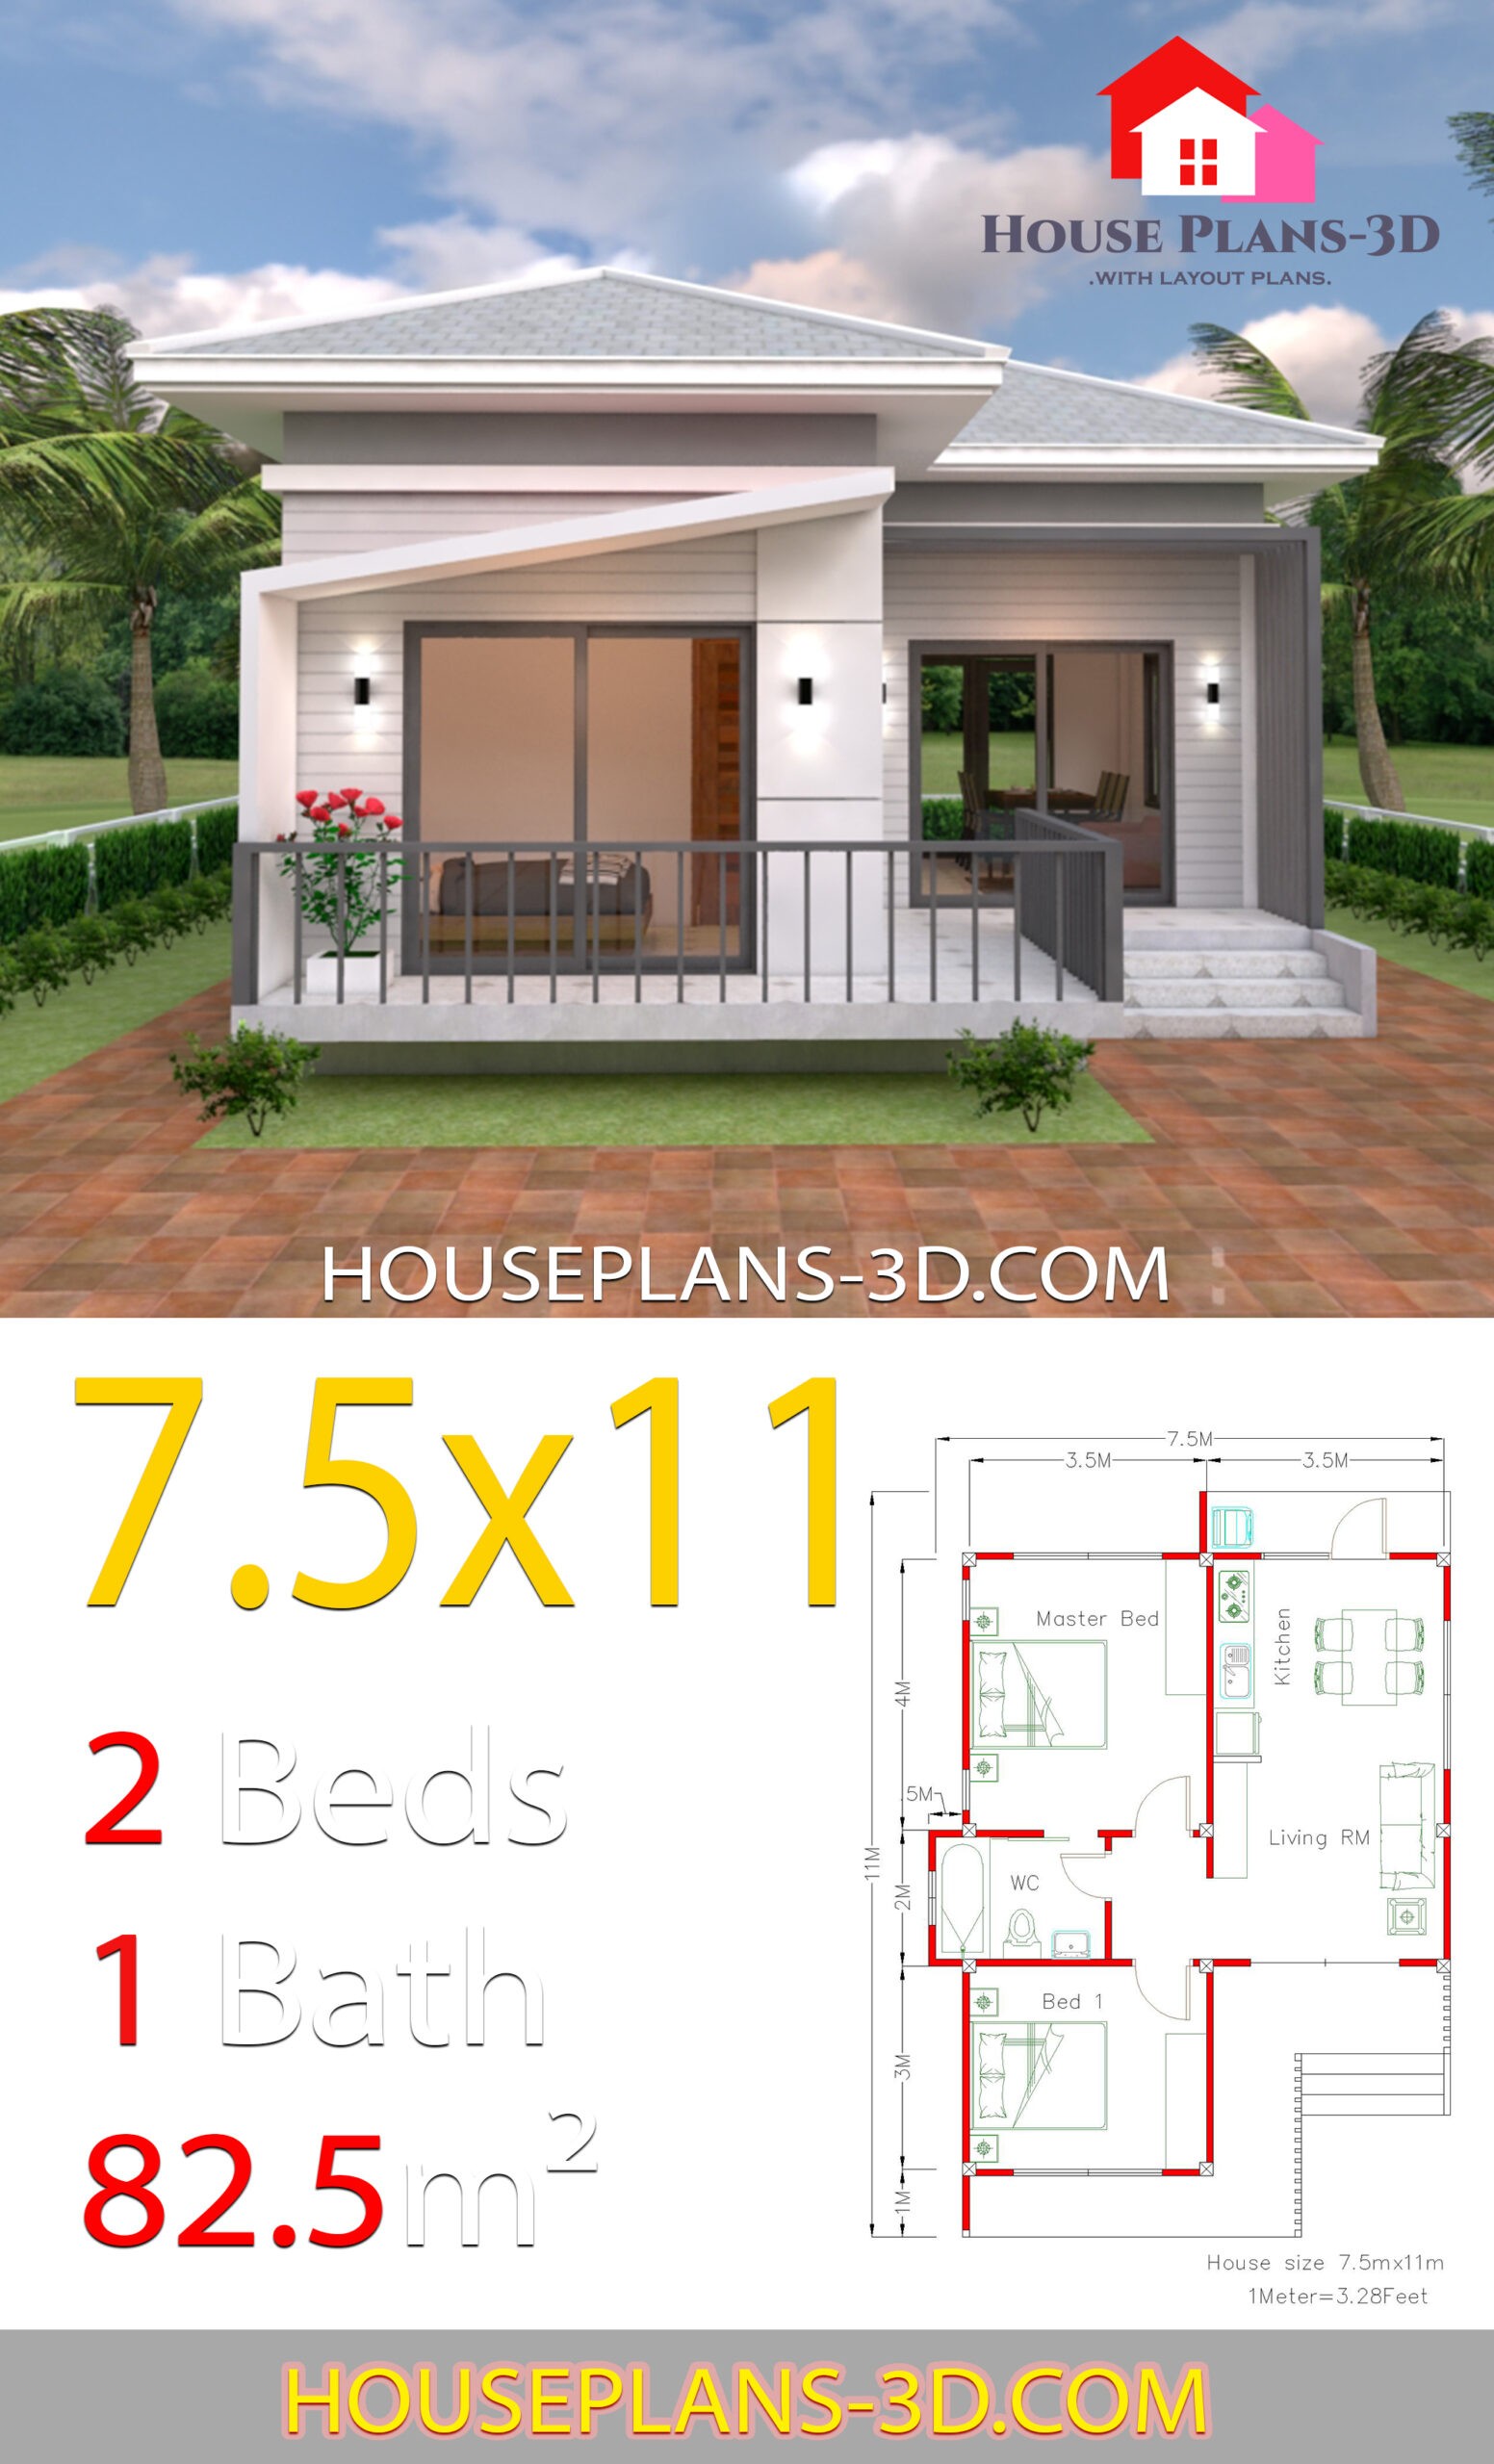 Hip 4 Best House Design With Front Size 7.5m